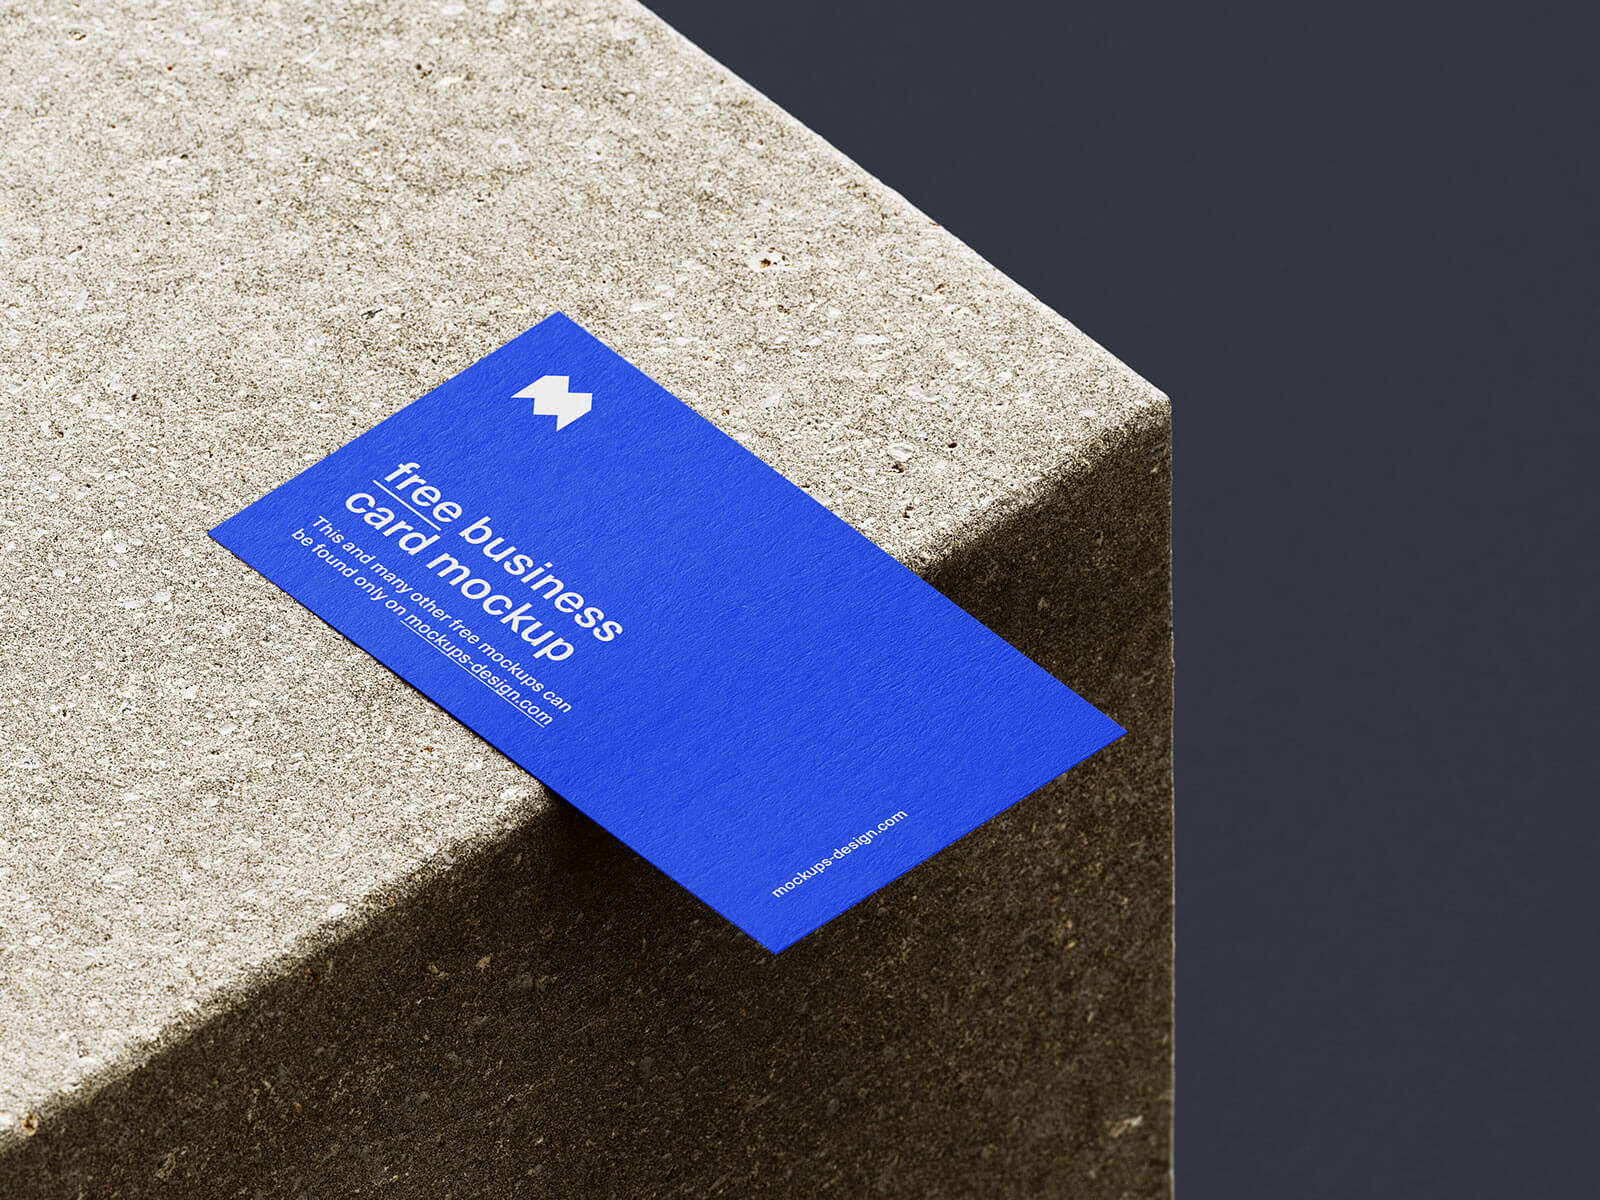 Free 3.5 x 2 Inches Business Card Mockup PSD Set